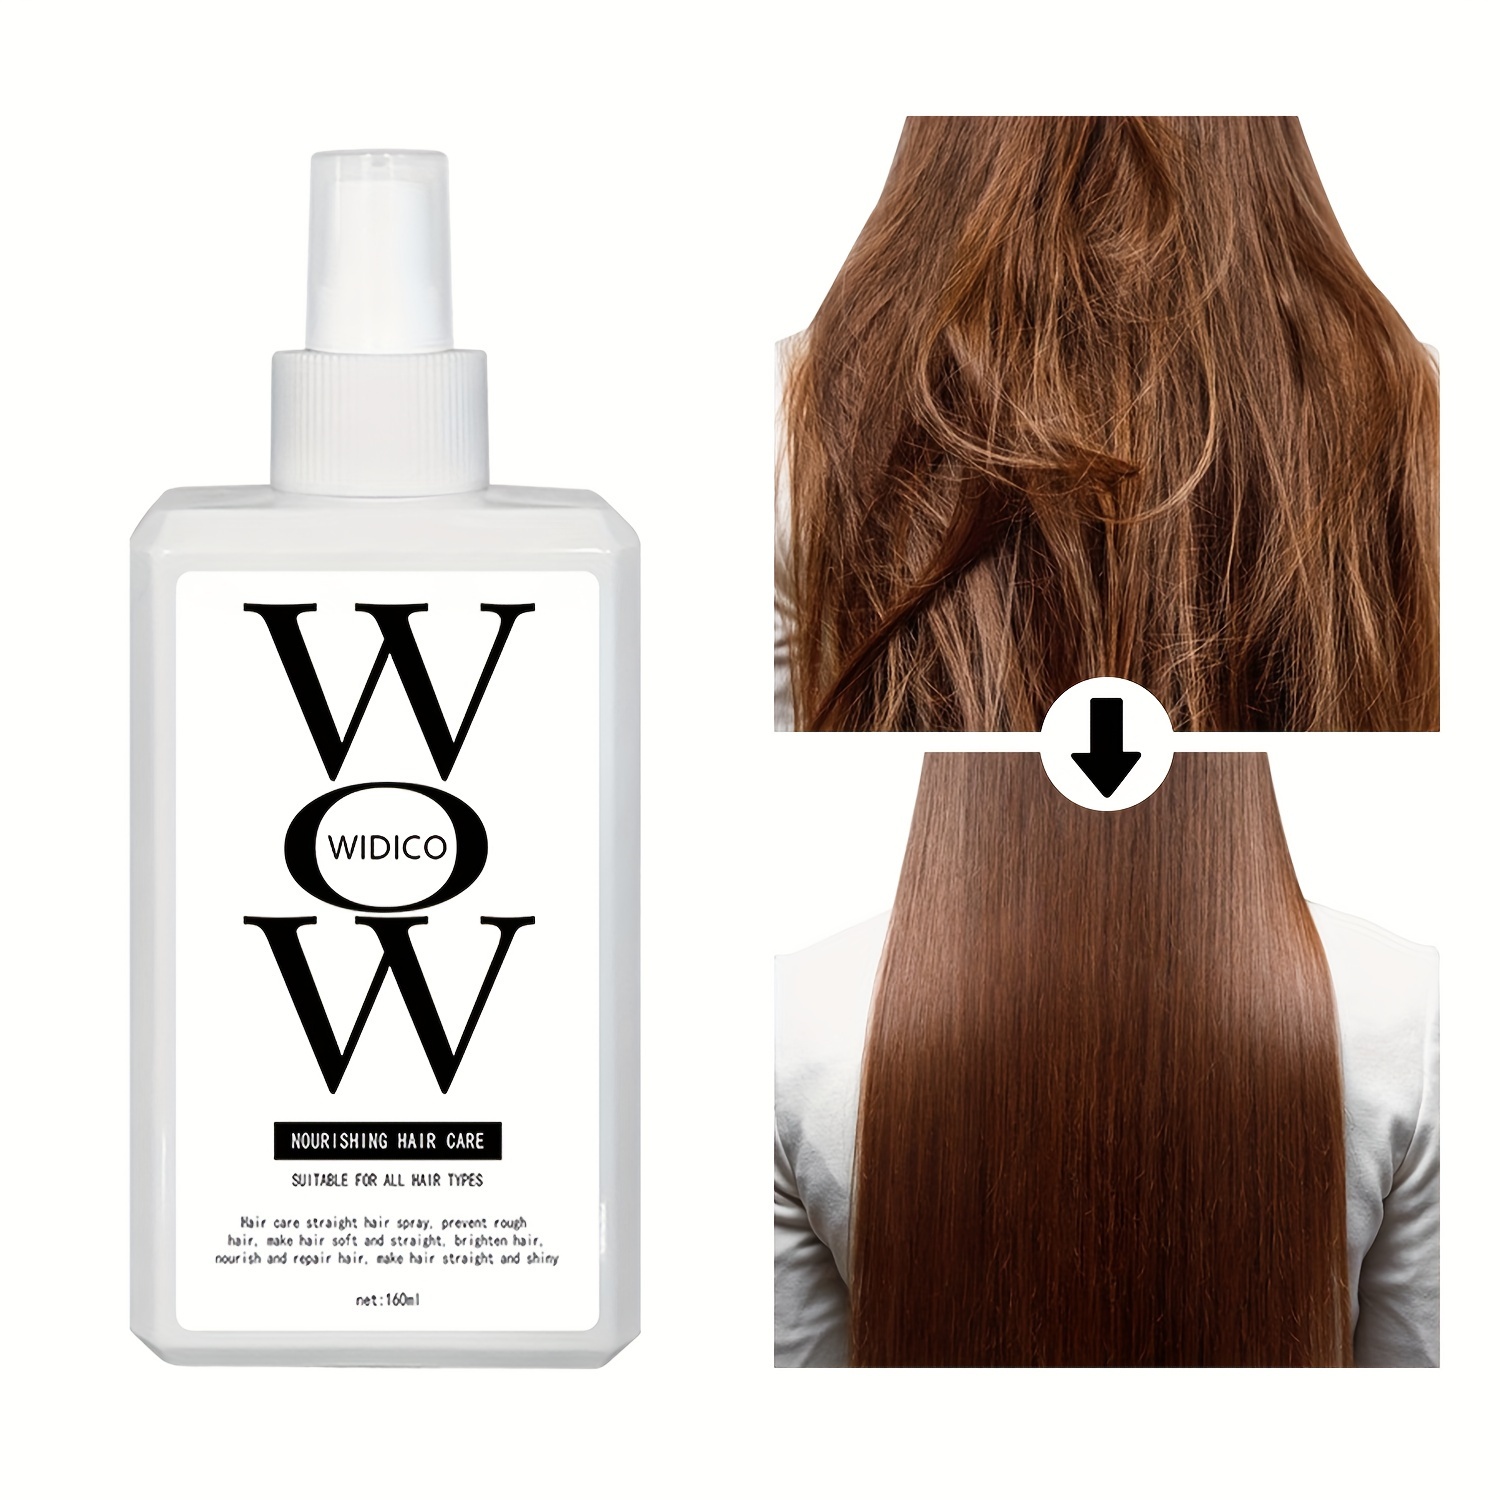 COLOR WOW Dream Coat Supernatural Spray - Keep Your Hair Frizz-Free and  Shiny No Matter the Weather with Award-Winning Anti-Frizz Spray